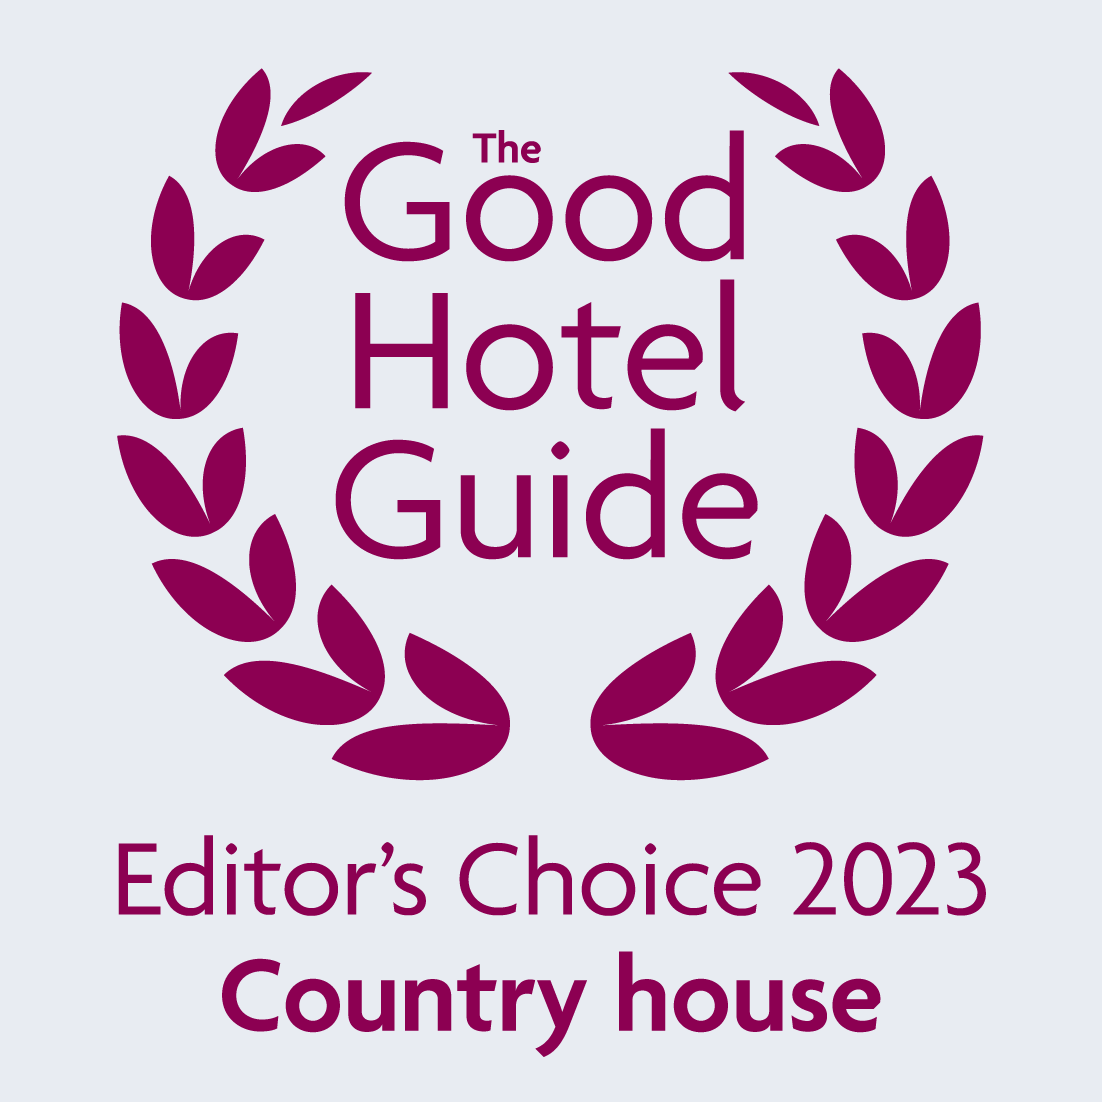 The Good Hotel Guide Editors Choice 2023 Award - Country House